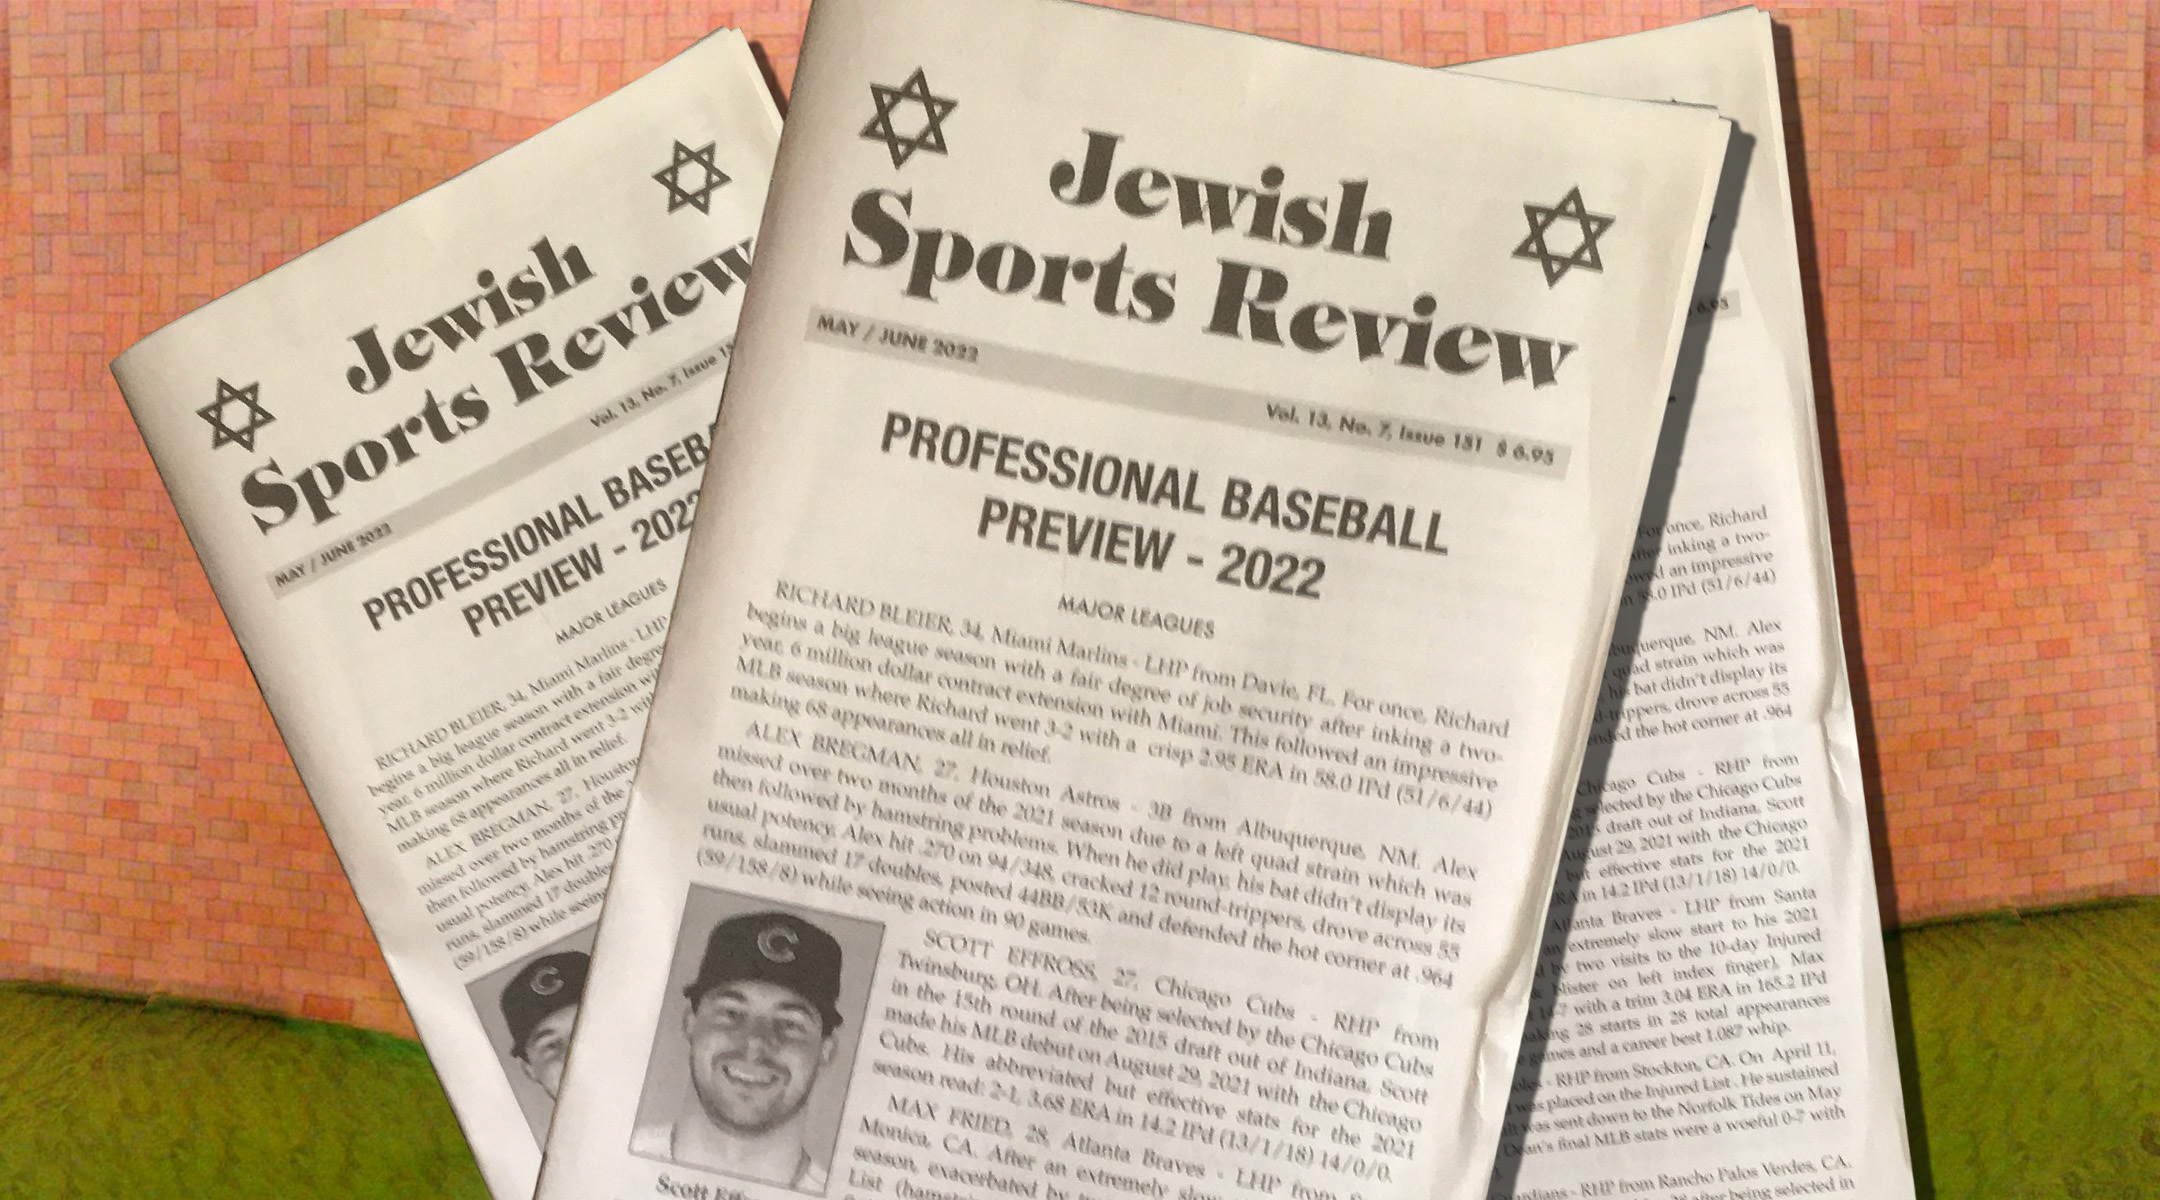 The Jewish Sports Review has ceased publication after a 25-year run. (Courtesy Ephraim Moxson; design by Mollie Suss)